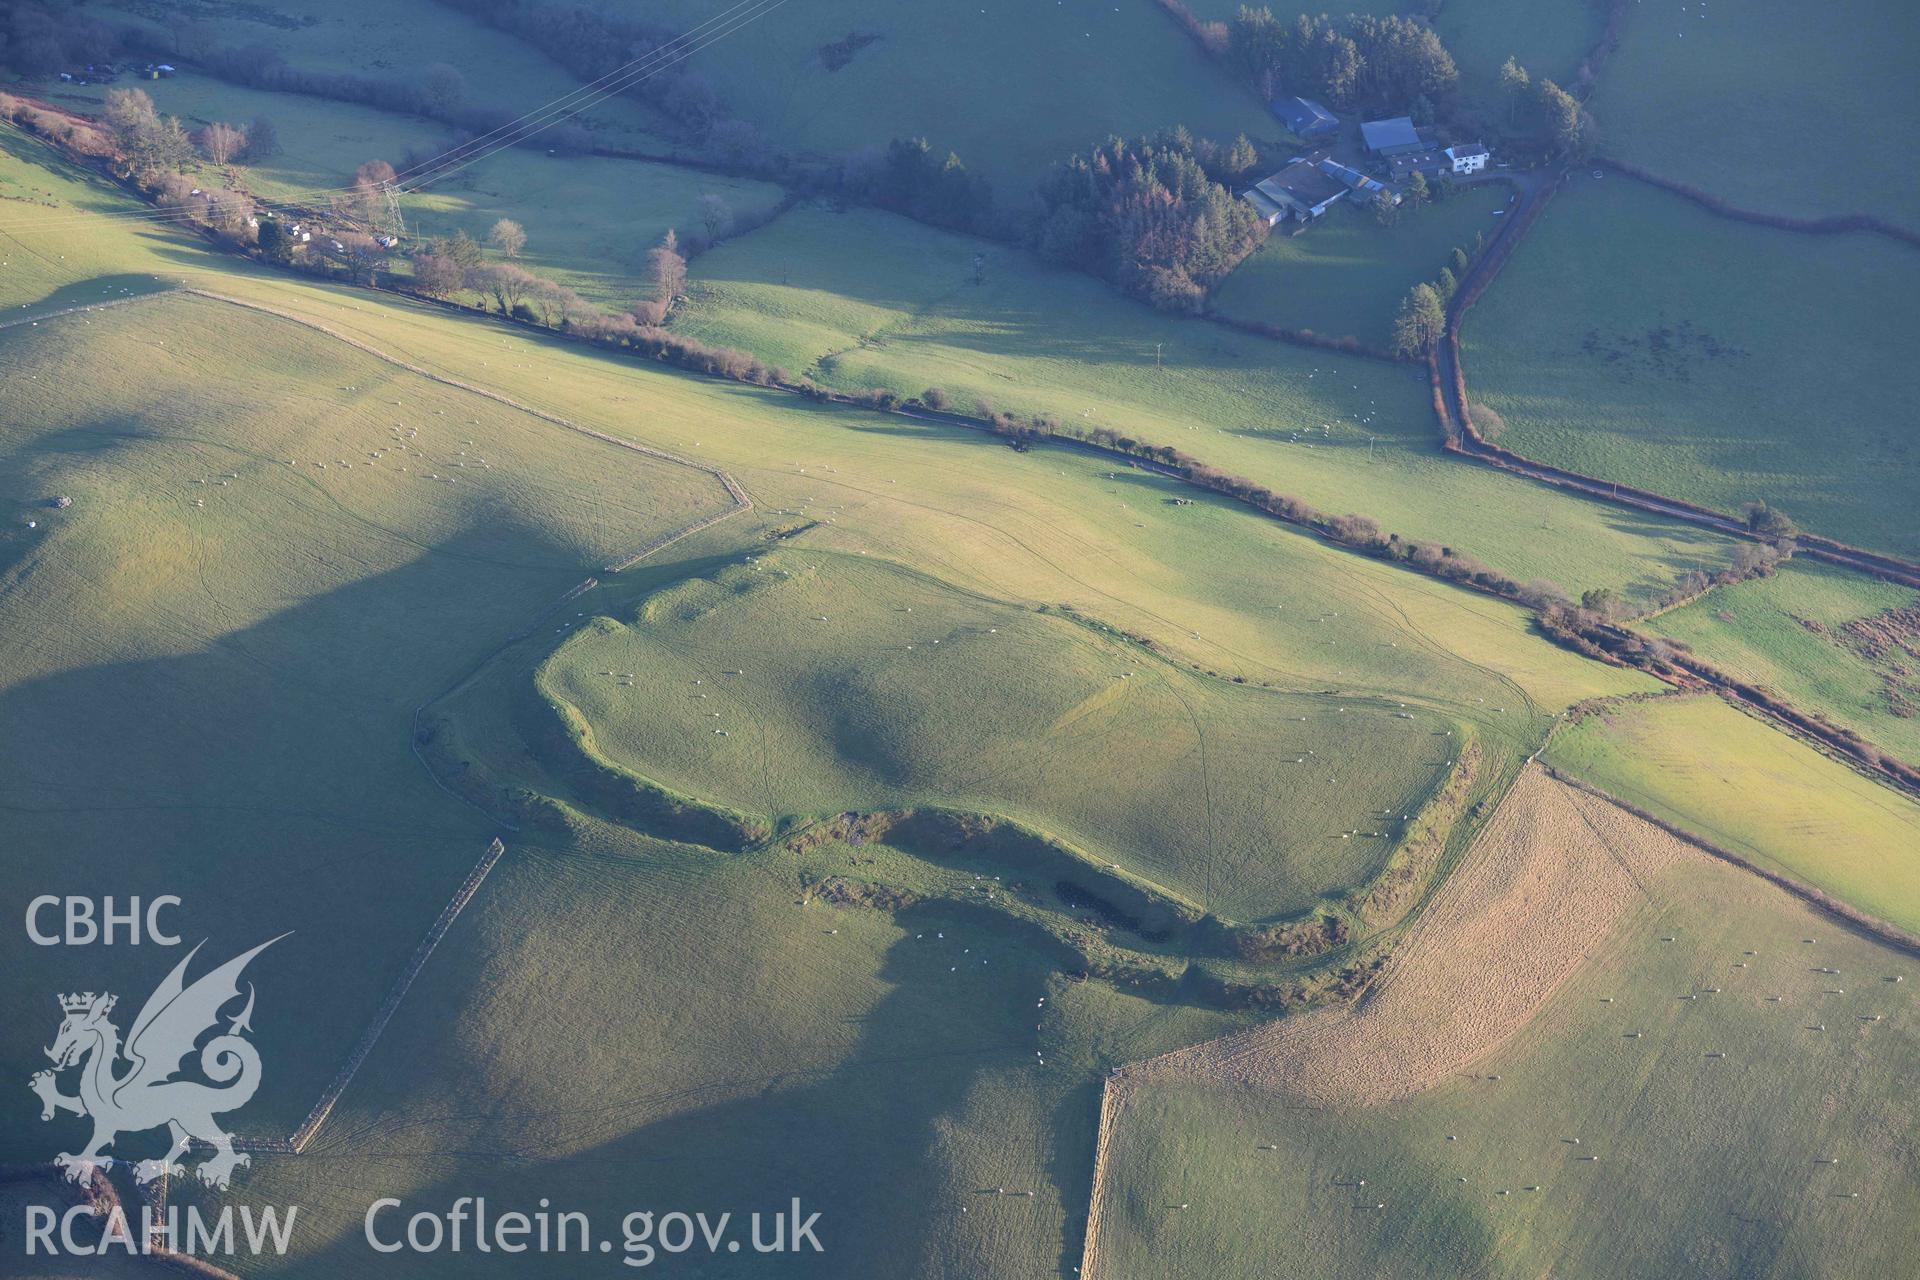 Oblique aerial photograph of Gaer Fawr taken during the Royal Commission